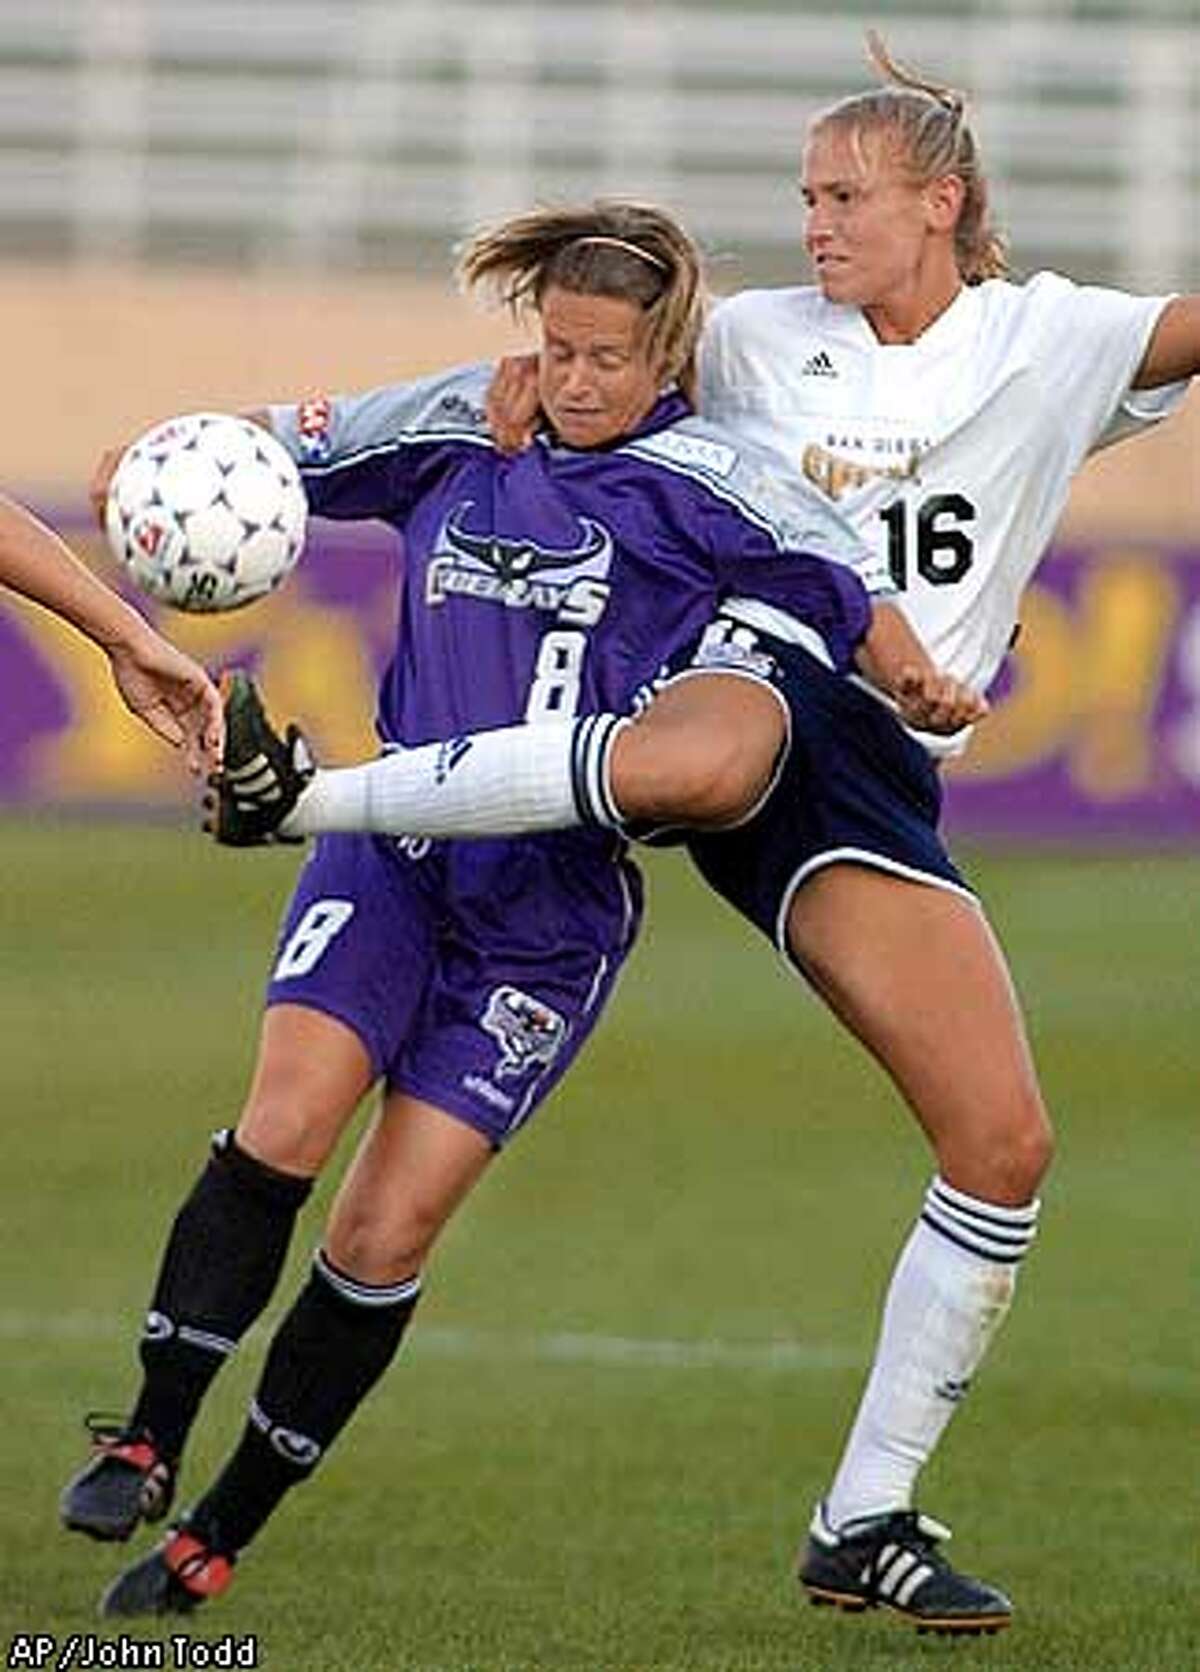 San Diego Spirit's Kim Pickup, right, and Bay Area CyberRays' Julie Murray, left, battle for the ball in the first half at Spartan Stadium in San Jose, Calif., Wednesday, July 25, 2001. (AP Photo/John Todd)